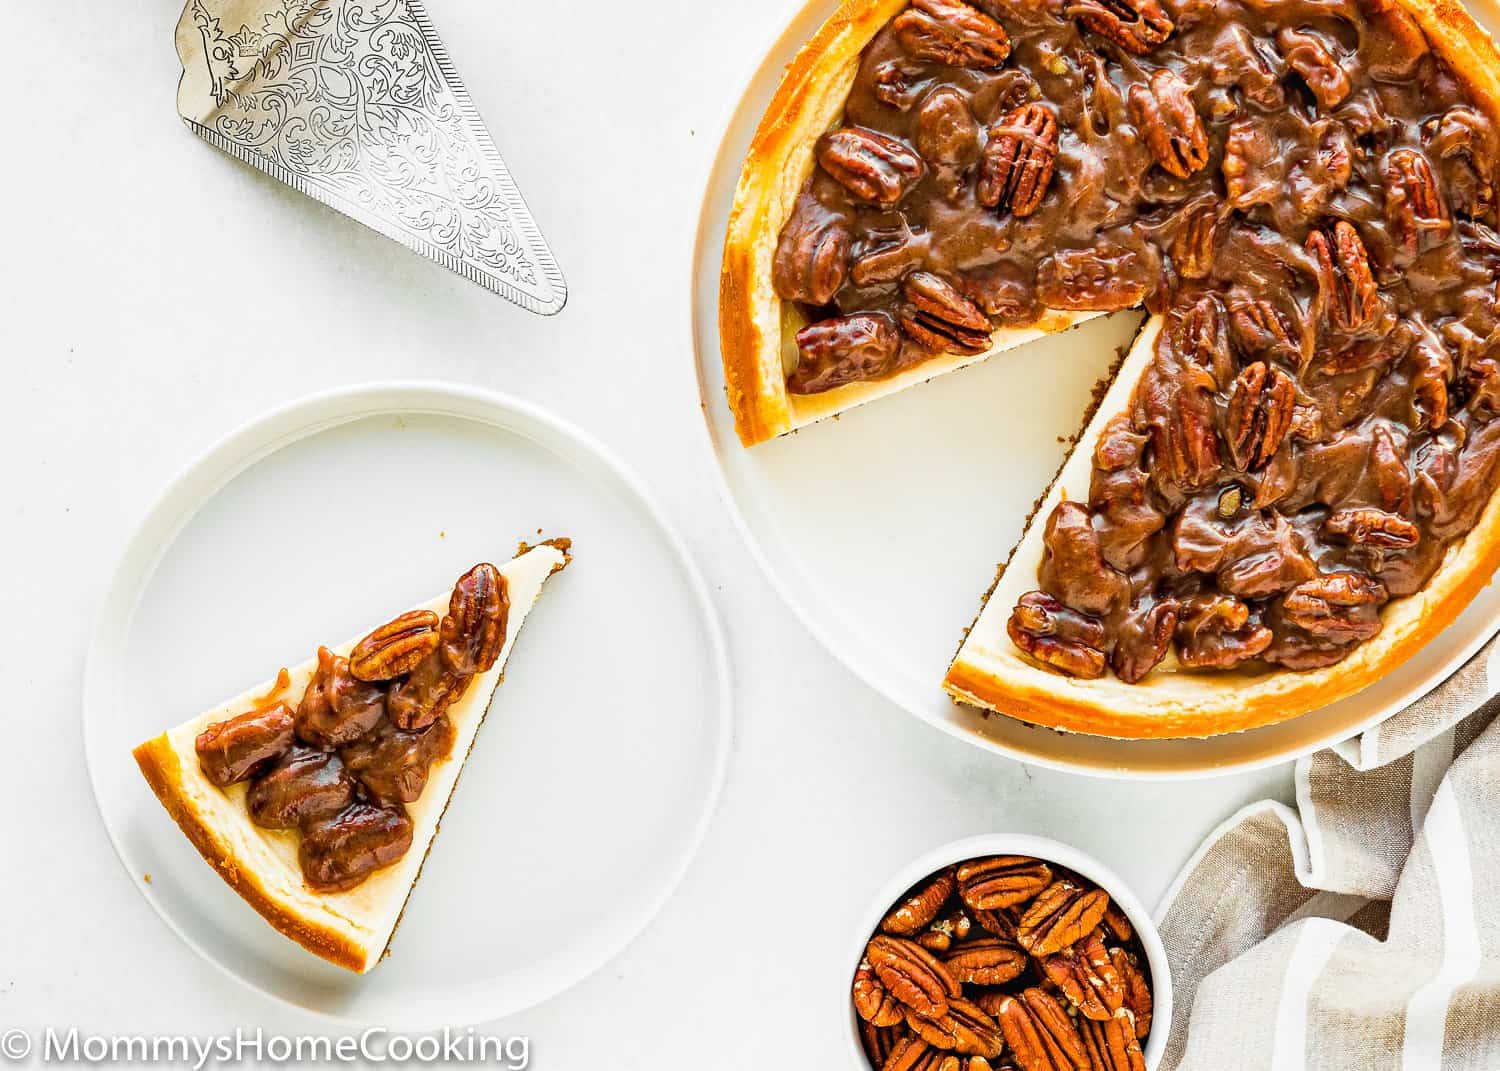 slice of cheesecake on a plate with pecan in a bowl on the side